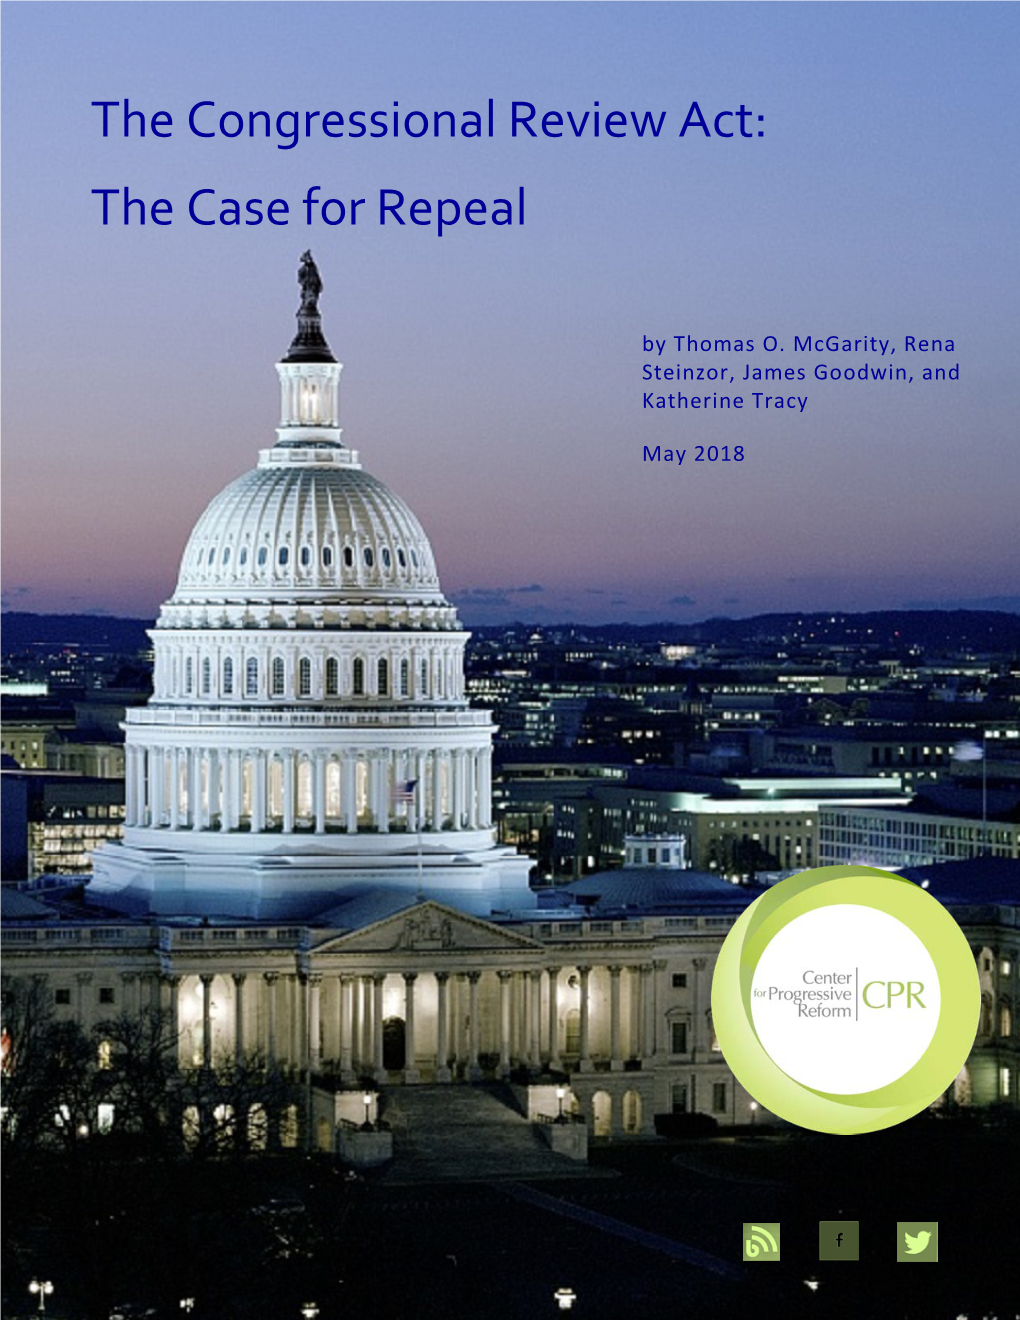 The Congressional Review Act: the Case for Repeal